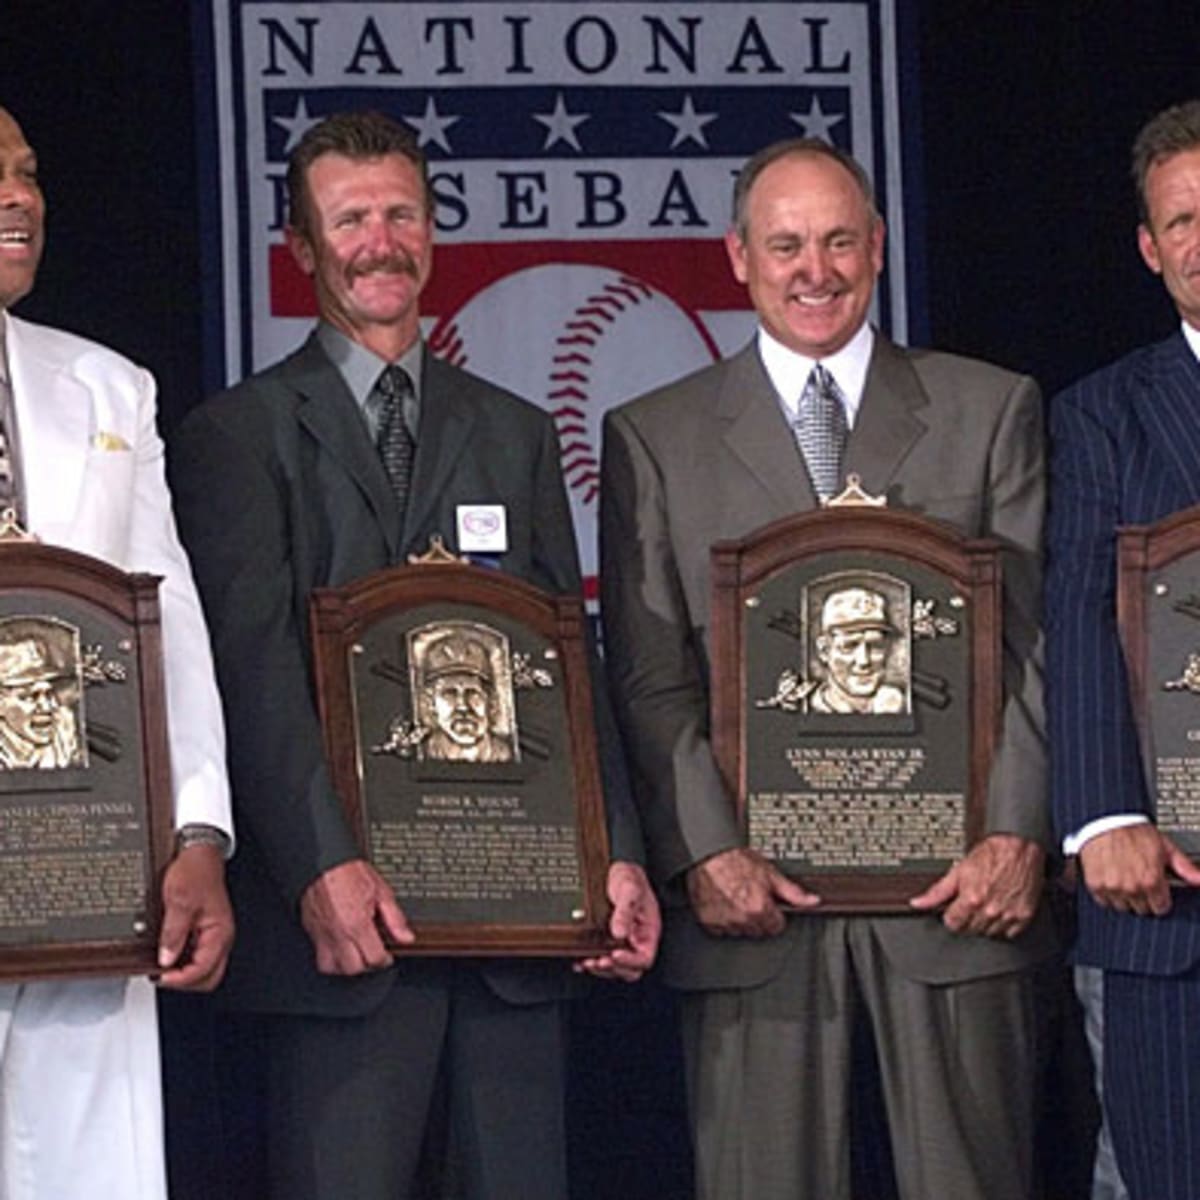 JAWS and the 2013 Hall of Fame ballot: Craig Biggio - Sports Illustrated